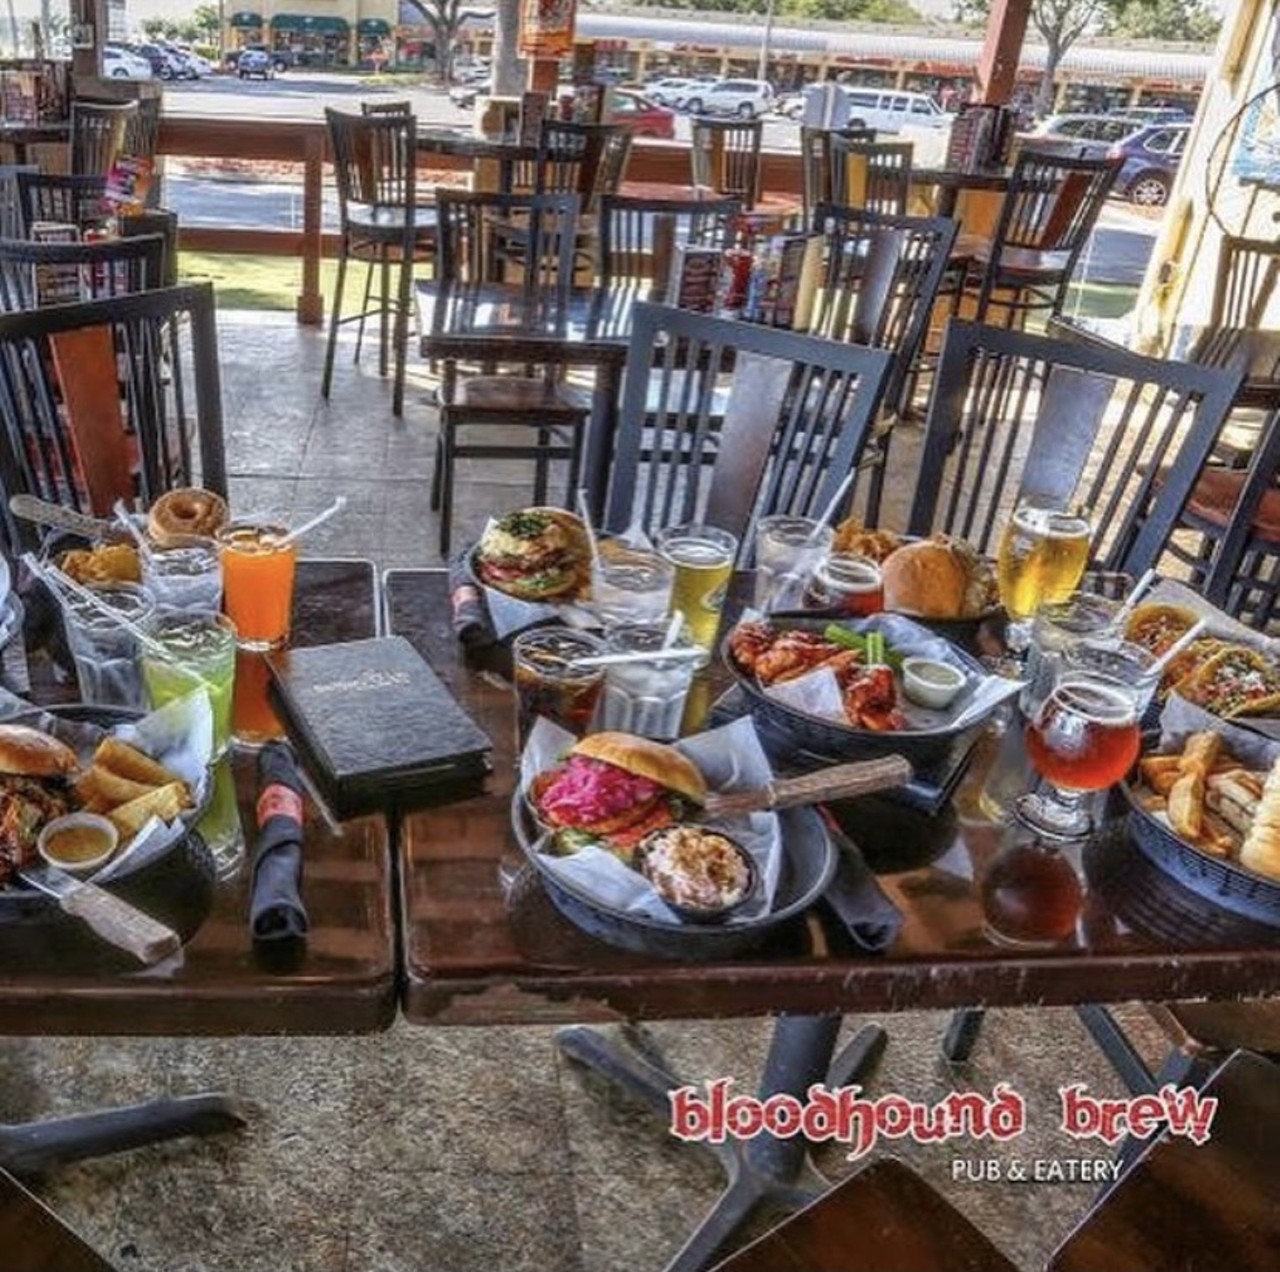 Bloodhound Brew Pub and Eatery 
5801 Conroy Rd, Orlando, FL 32835, (407) 578-5711
Home of the Dynamite Dog Challenge, Bloodhound is the perfect place to enjoy live music in a comfortable patio area. 
Photo via Bloodhound Brew Pub and Eatery/Instagram